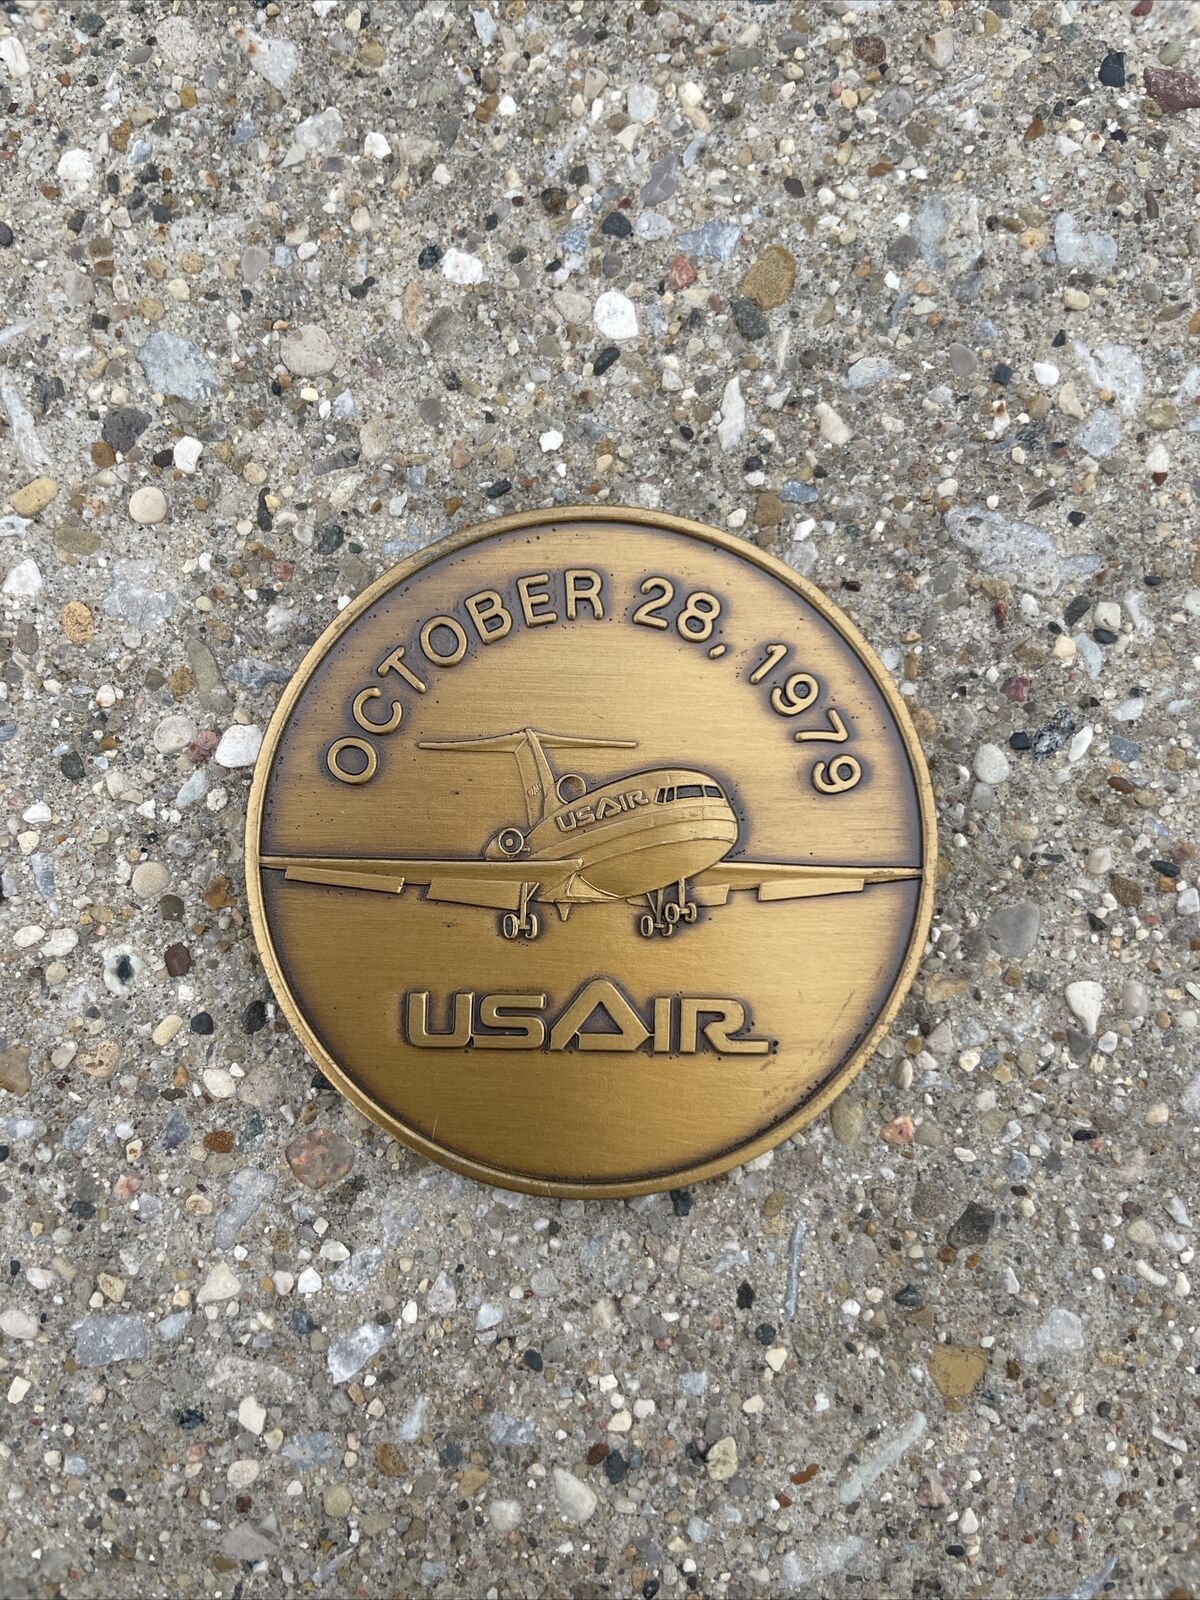 K5) Oversized October 28 1979 USAir Airlines Commemorative Coin Medal